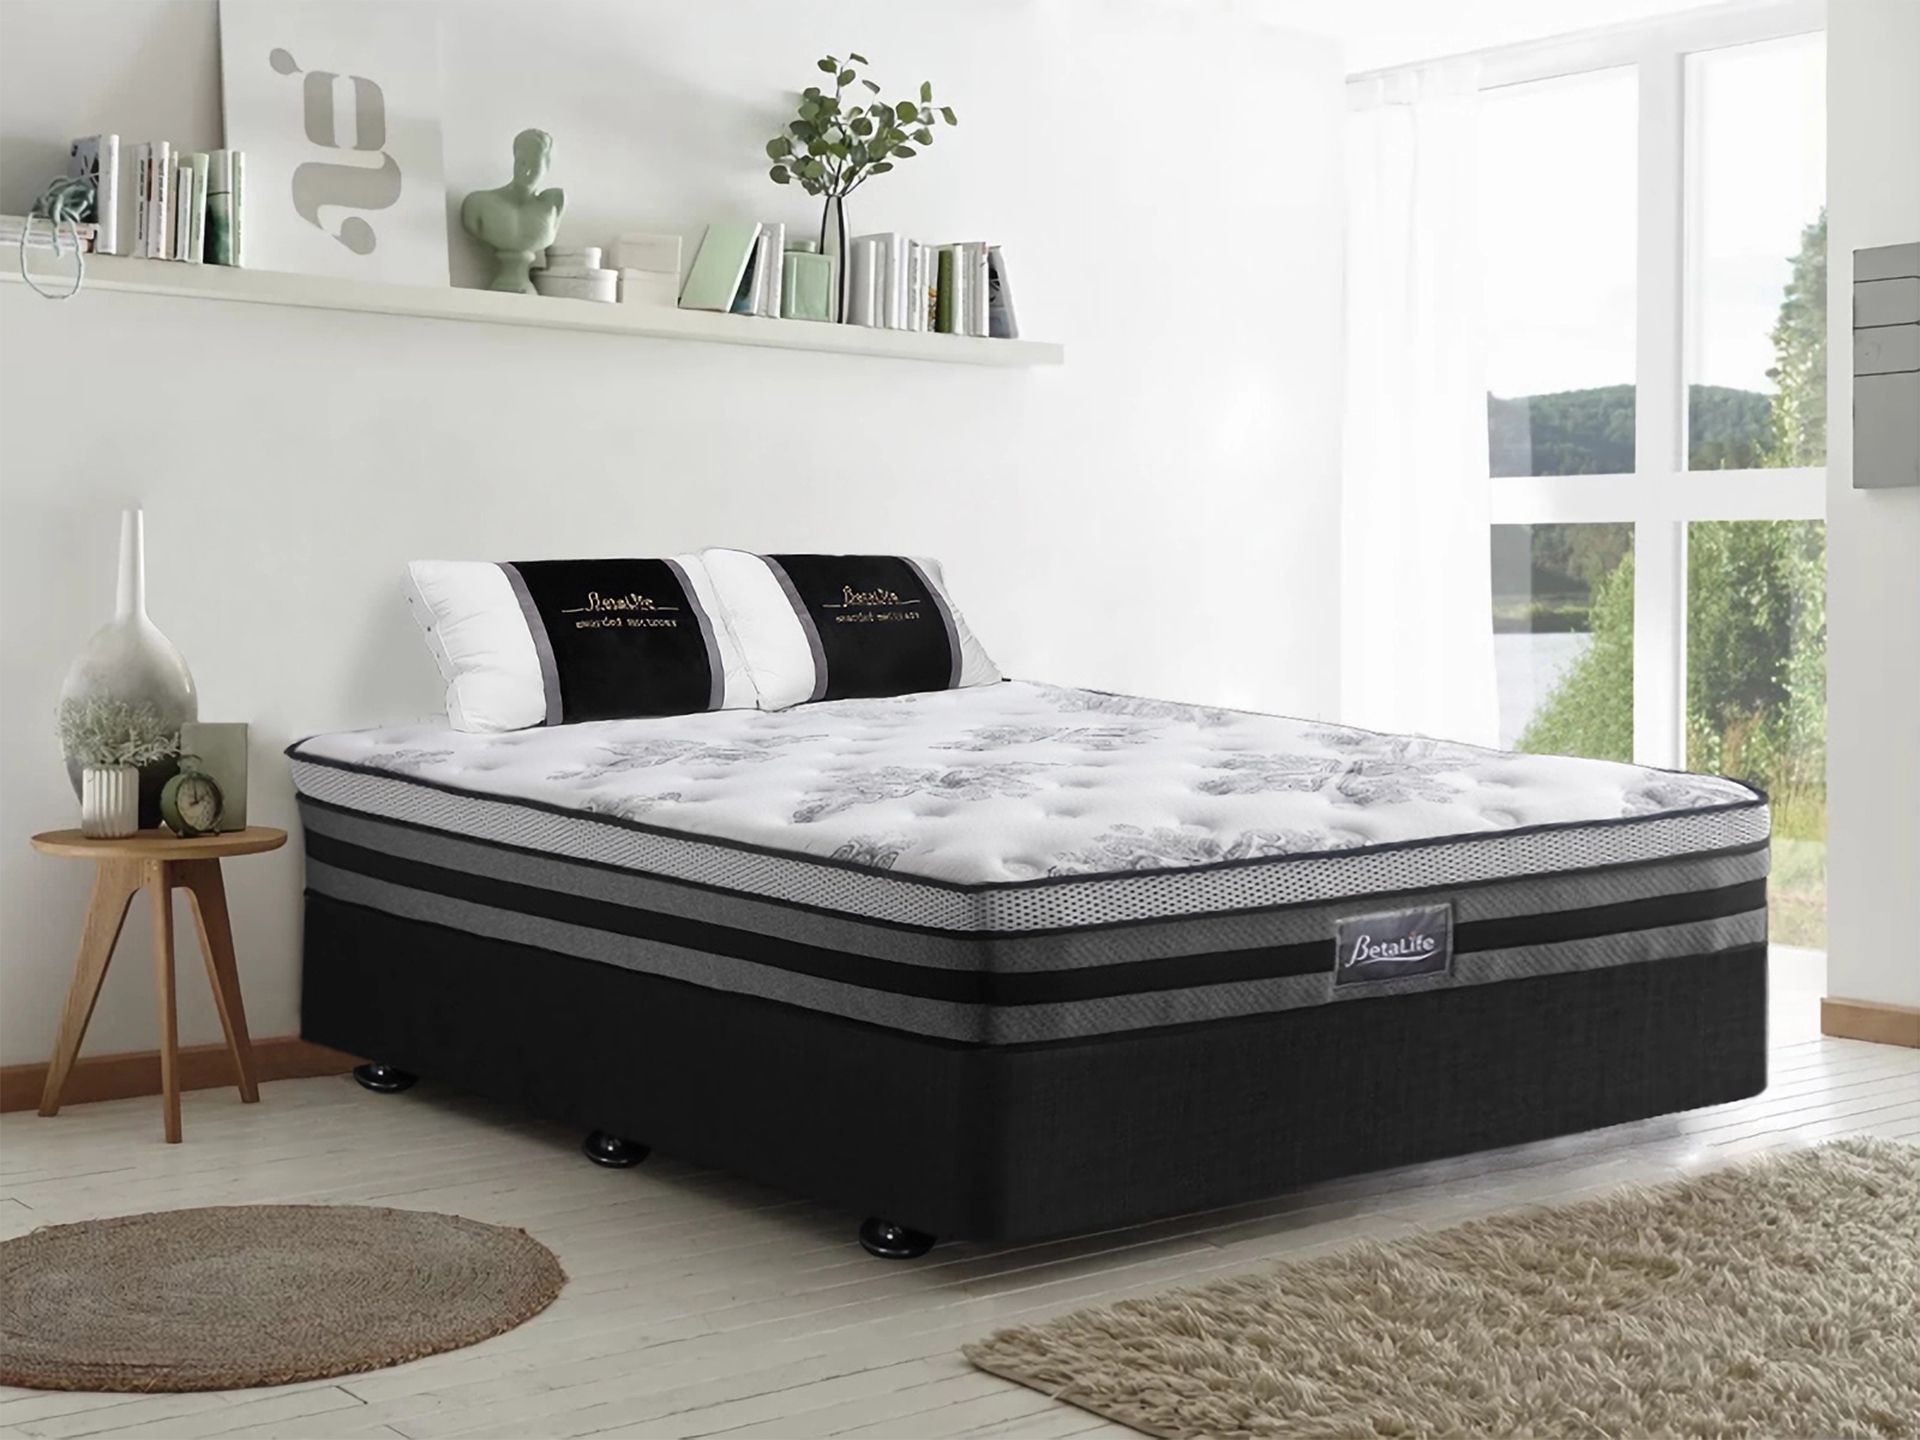 Vinson Fabric Queen Bed with Luxury Latex Mattress - Black